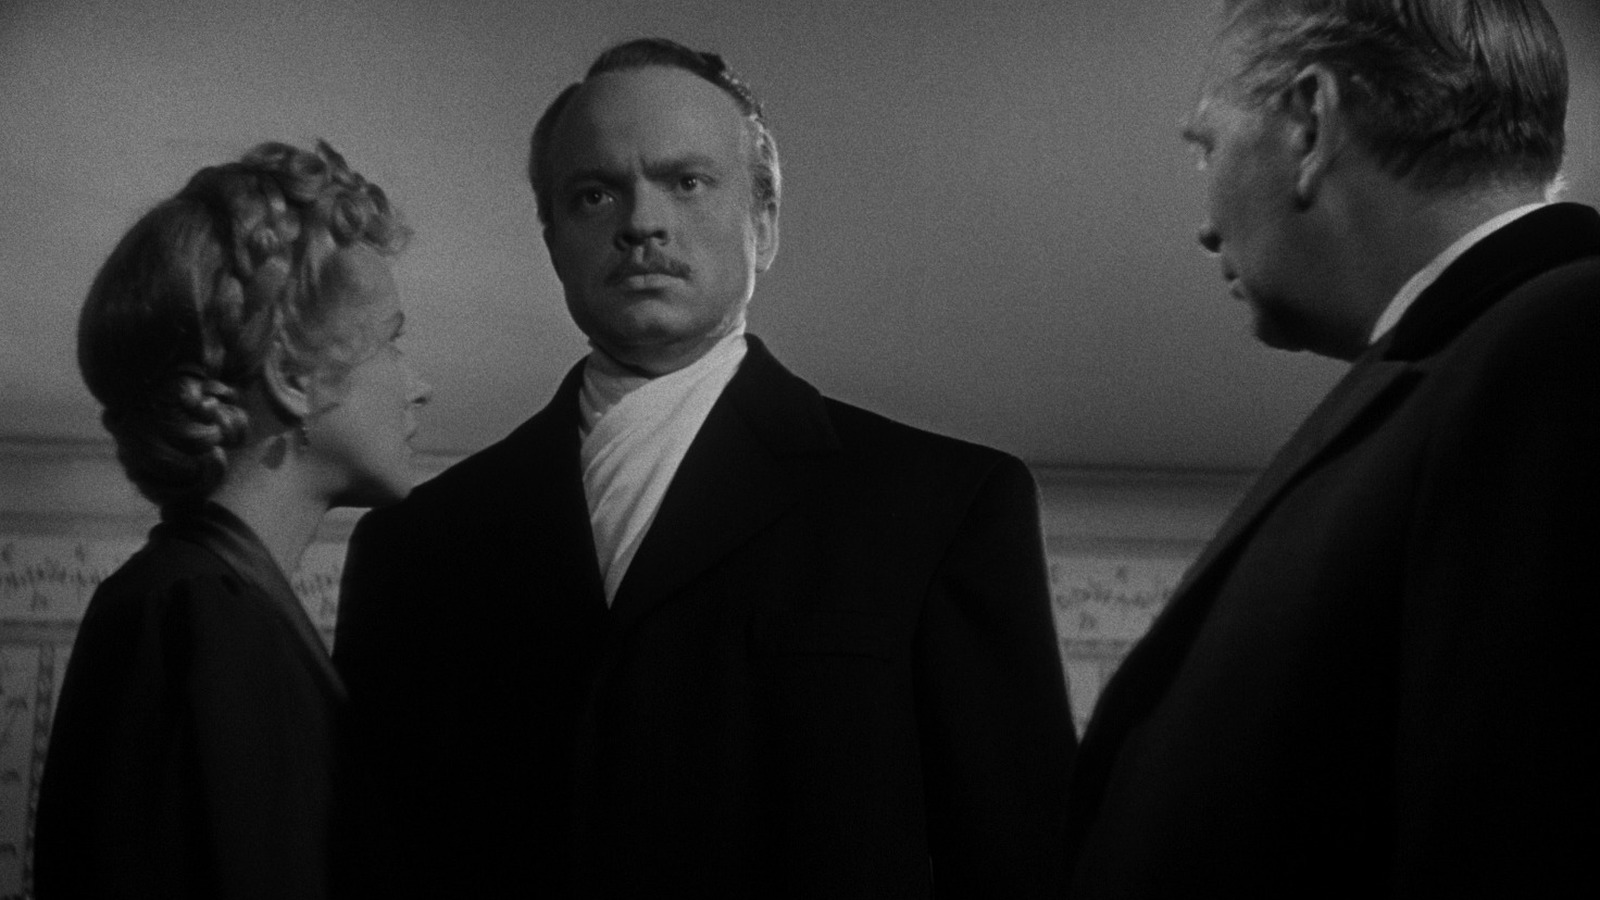 #Citizen Kane Wasn’t Always Seen As A Cinematic Classic